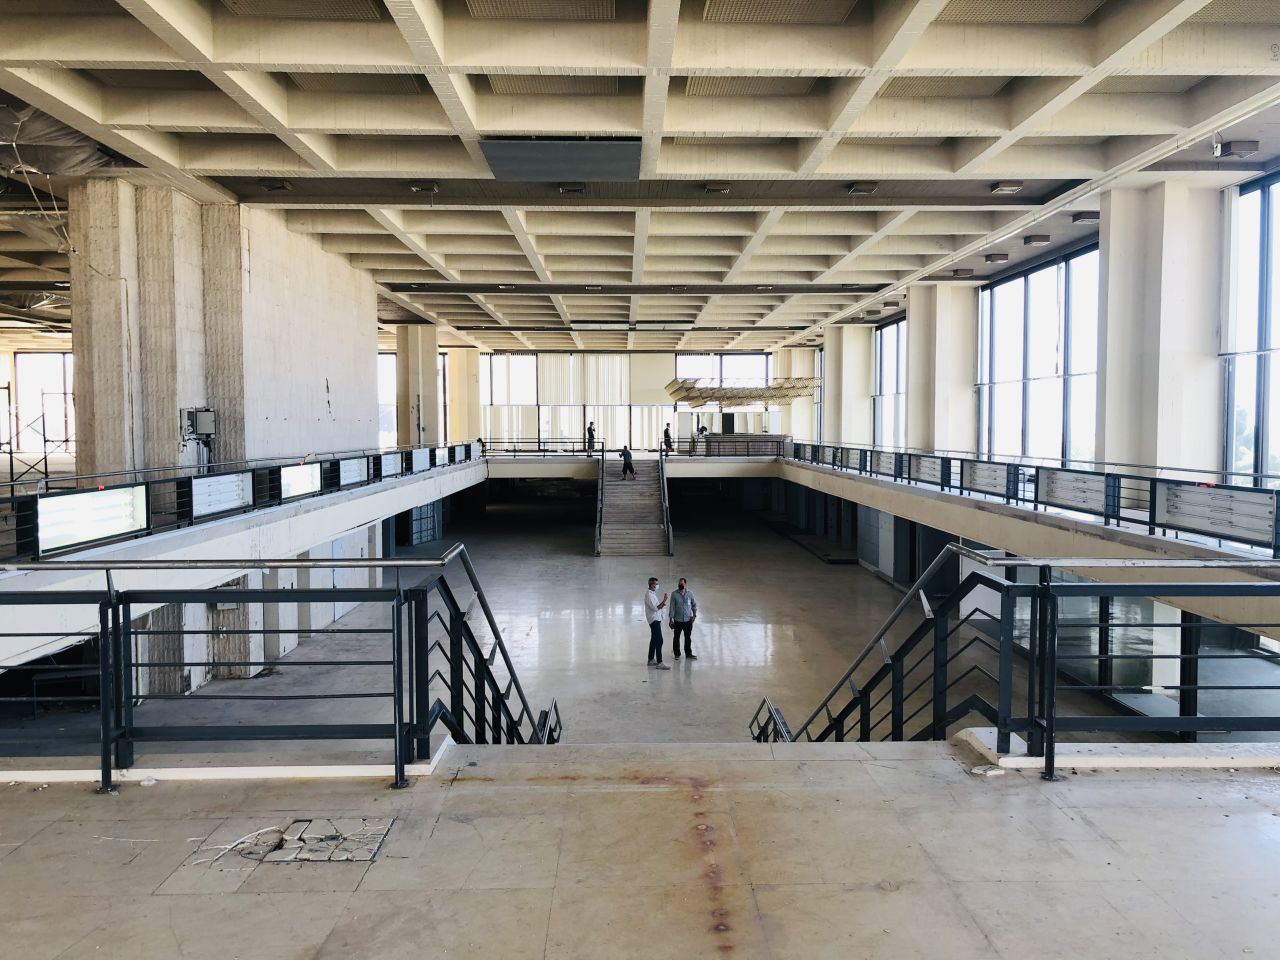 The old airport terminal building, designed by Finnish-American architect Eero Saarinen in the 1960s, will also be preserved in the new development.